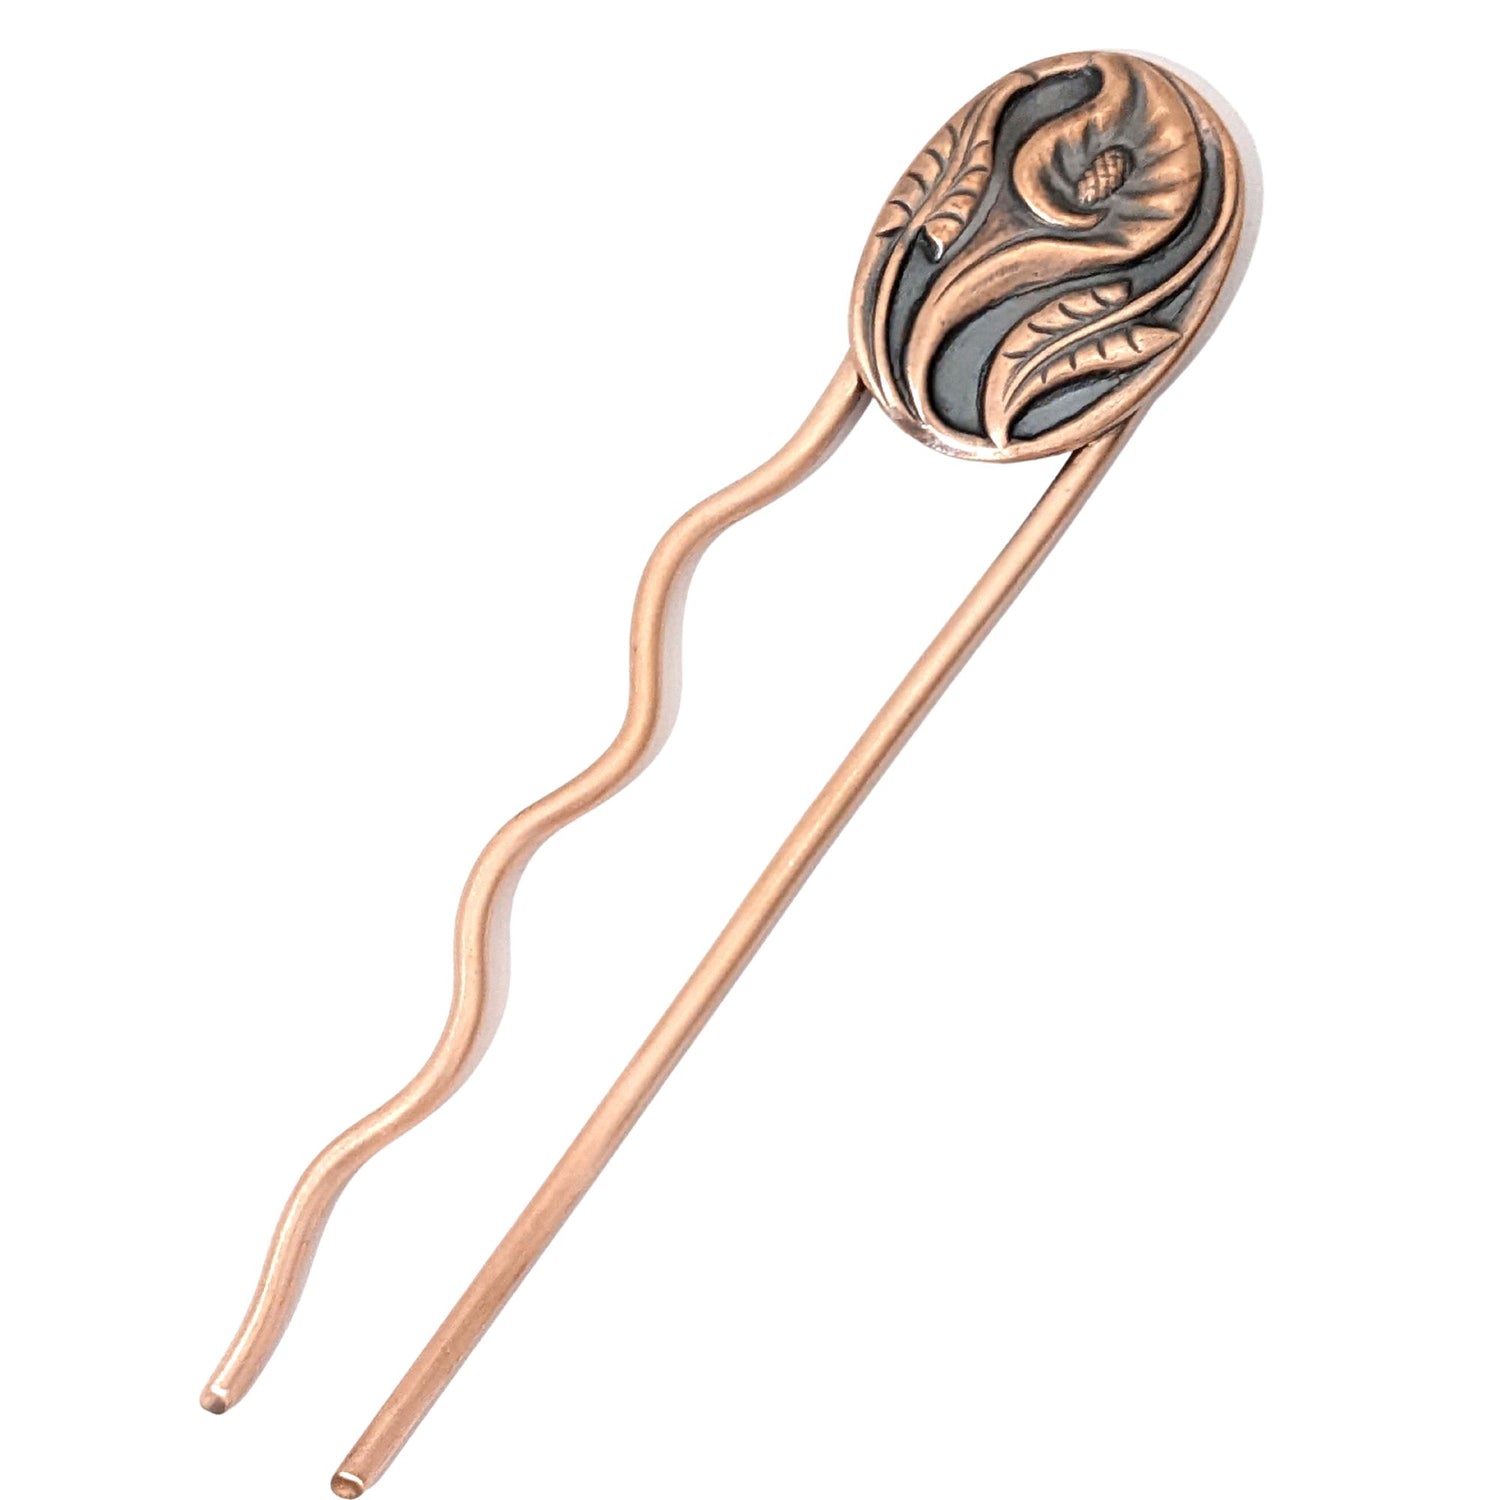 Full view of Copper hair fork with a calla lily flower design. Shows the copper forks. The Left fork has five bends to form a squiggle shape. The right fork is straight. Large oval copper piece with a single calla flower in the middle. A stem and leaf facing upward on the left side of the oval, and one facing downward on the right side of the oval. 